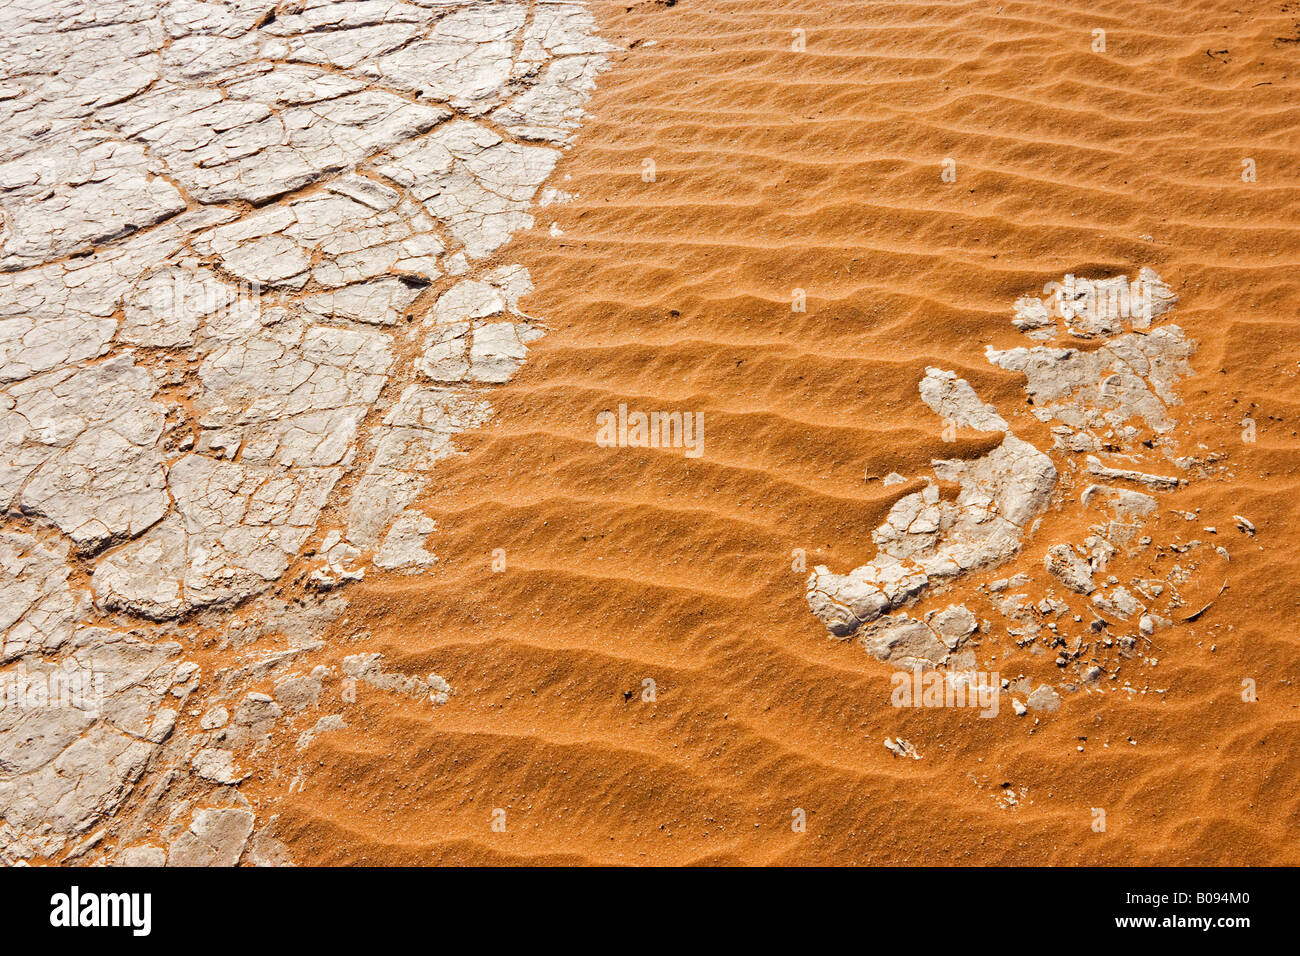 Sand ripples and dried up loamy soil, Deadvlei, Namib Desert, Namibia, Africa Stock Photo